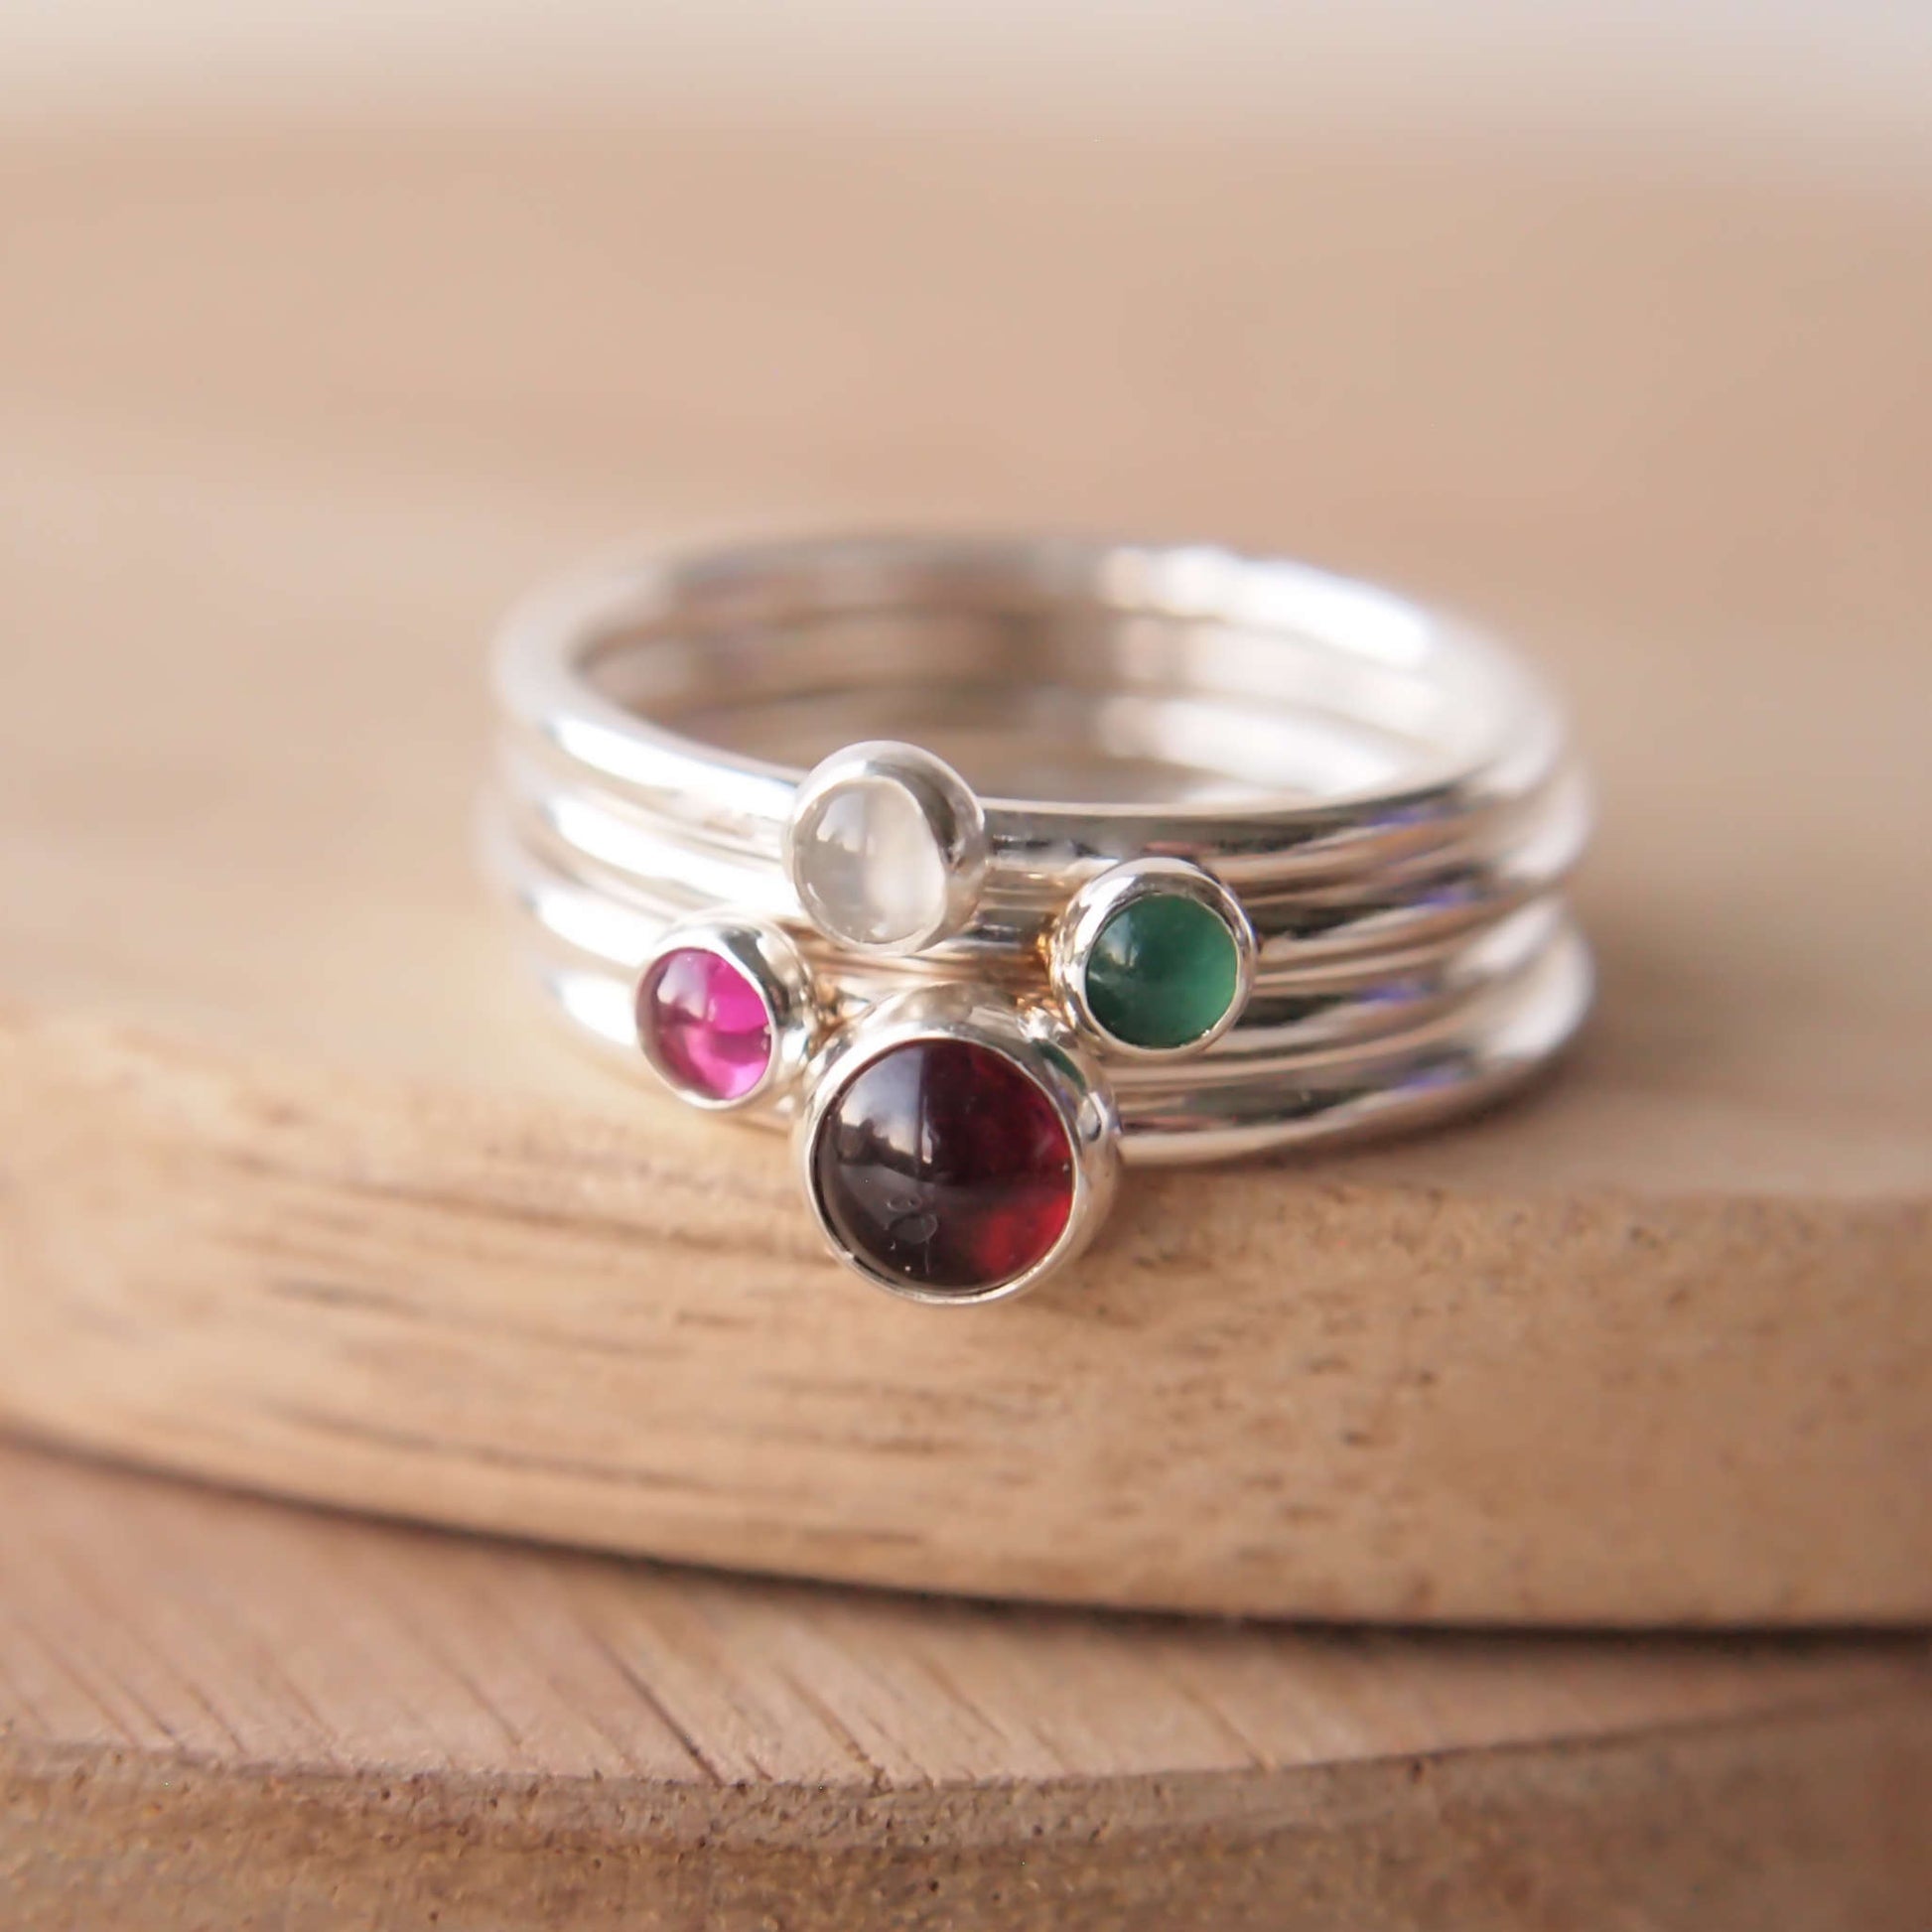 Four ring set with family birthstones and sterling Silver  with a 5mm round red garnet, green Agate, Pink Lab Ruby and a white Moonstone. Handmade by maram jewellery in Edinburgh UK 